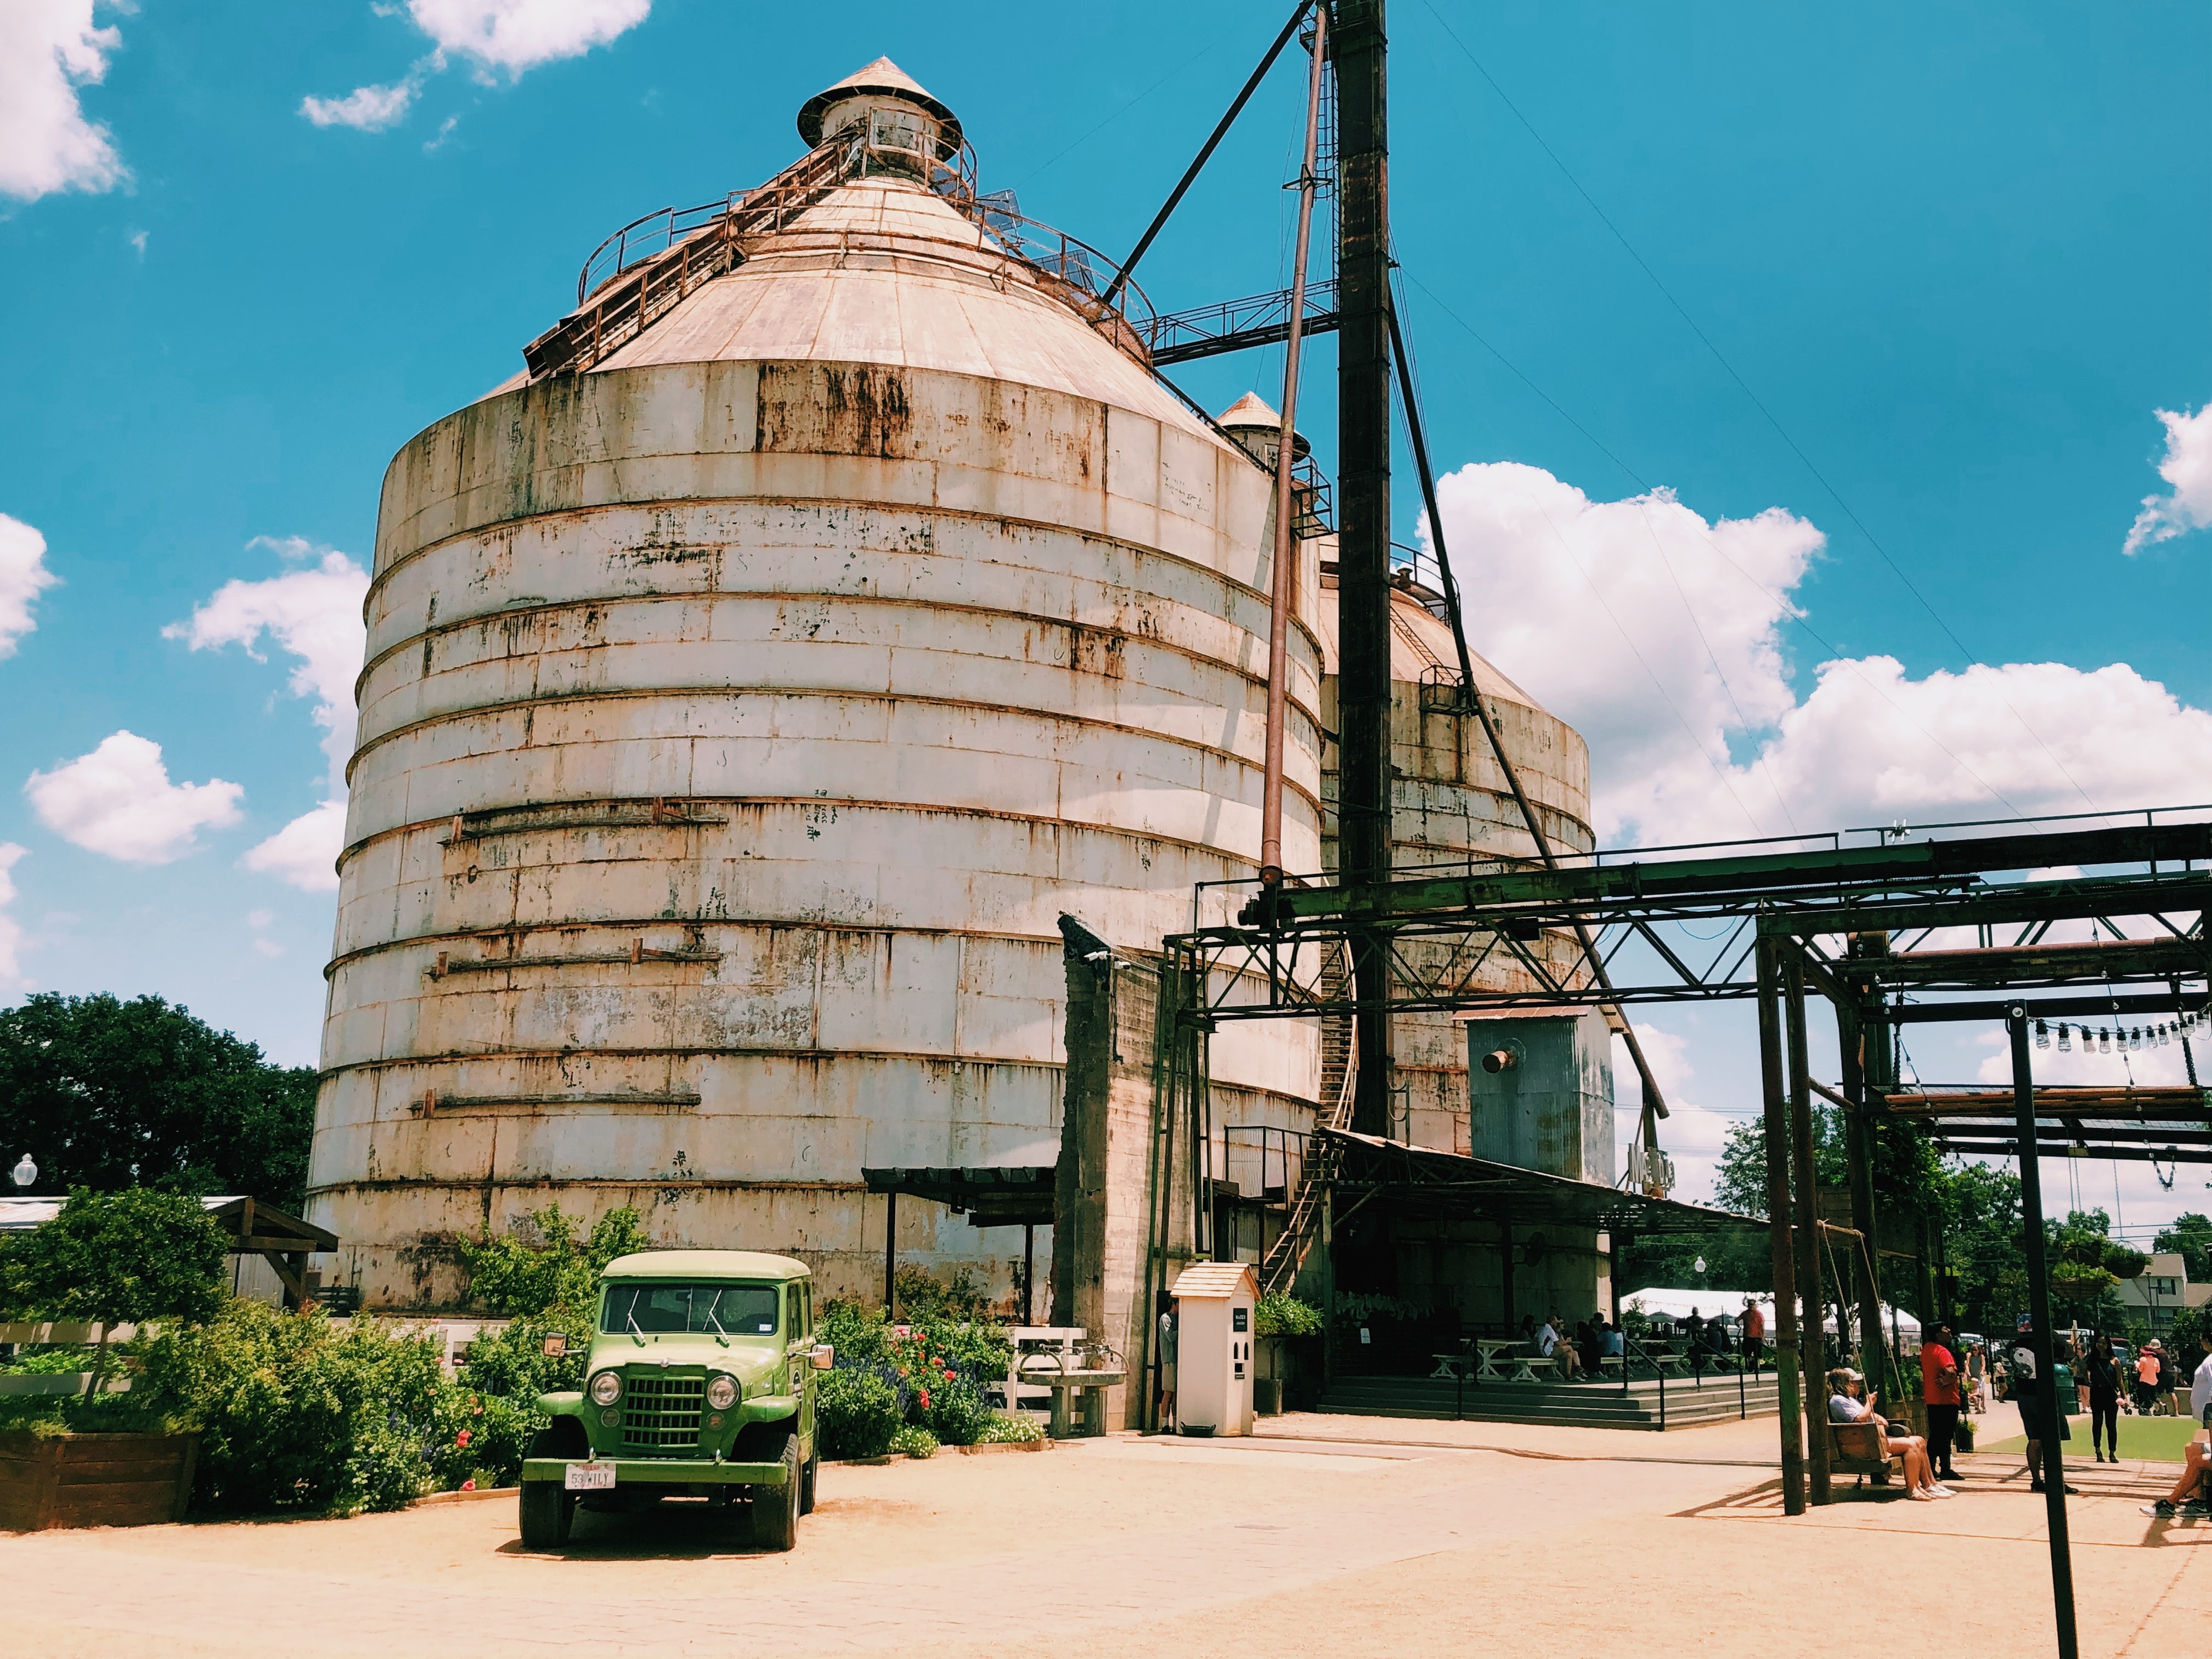 Visit The Silos and explore all that Chip and Jo have built at Magnolia. Be sure to stop in at pick up some cupcakes from the bakery, or visit the food truck yard for some amazing local eats.